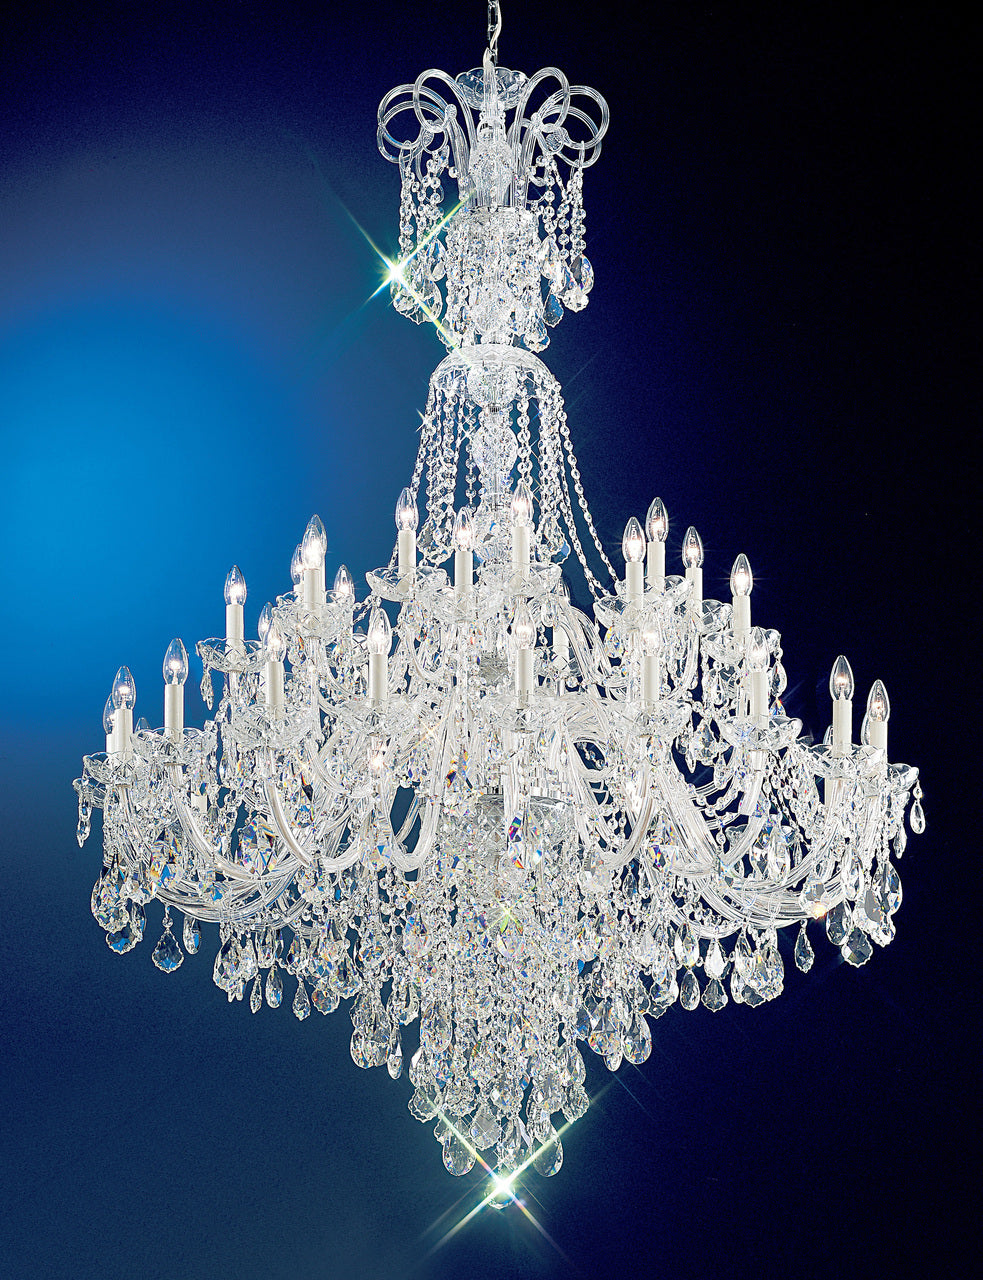 Classic Lighting 8266 G C Bohemia Crystal/Glass Chandelier in 24k Gold (Imported from Italy)